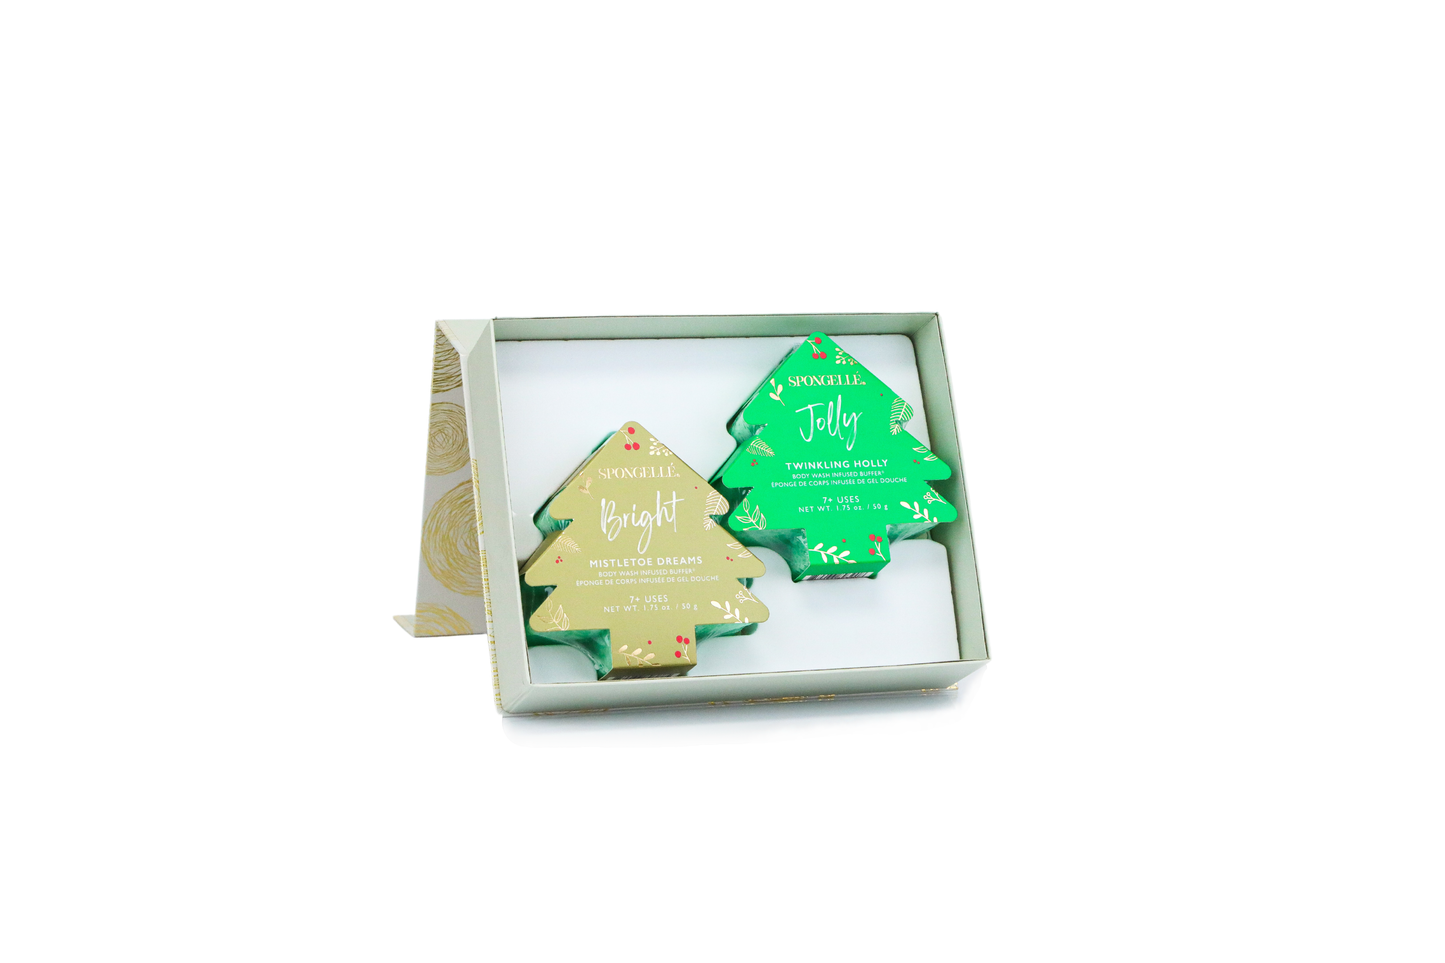 Holiday Wishes - Holiday Tree Ornament Buffer Gift Set